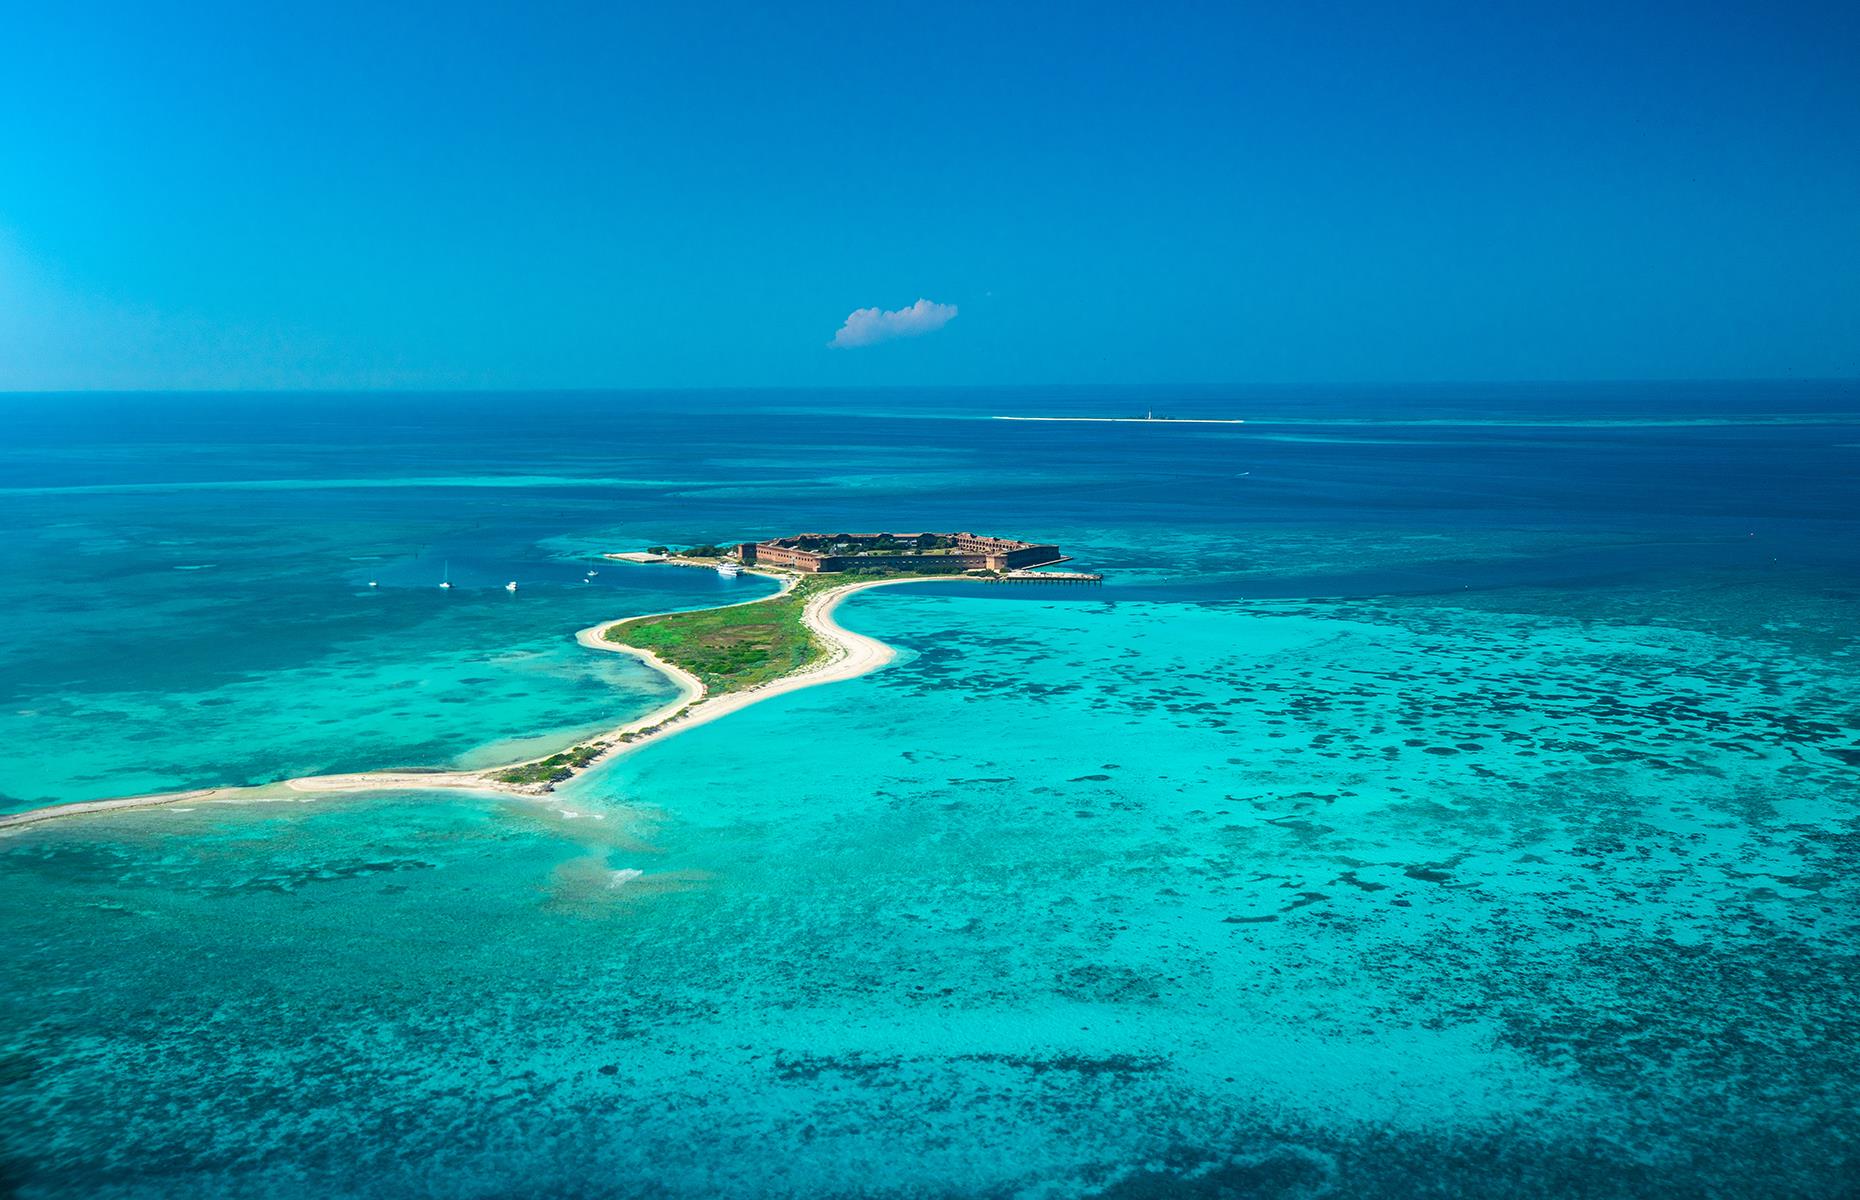 <p>Imagine yourself on a tropical vacation as you go on <a href="https://artsandculture.withgoogle.com/en-us/national-parks-service/dry-tortugas/near-little-africa-tour">a virtual dive</a> through a shipwreck in Dry Tortugas and swim in the third-largest barrier reef in the world. As 99% of the Dry Tortugas National Park is underwater, you'll spend a significant amount of time exploring the seas, but once you're ready to head back on land, you can tour the Civil War-era fortress, Fort Jefferson. Now discover <a href="https://www.loveexploring.com/galleries/94798/spectacular-american-castles-you-never-knew-existed?page=1">spectacular American castles you never knew existed</a>.</p>